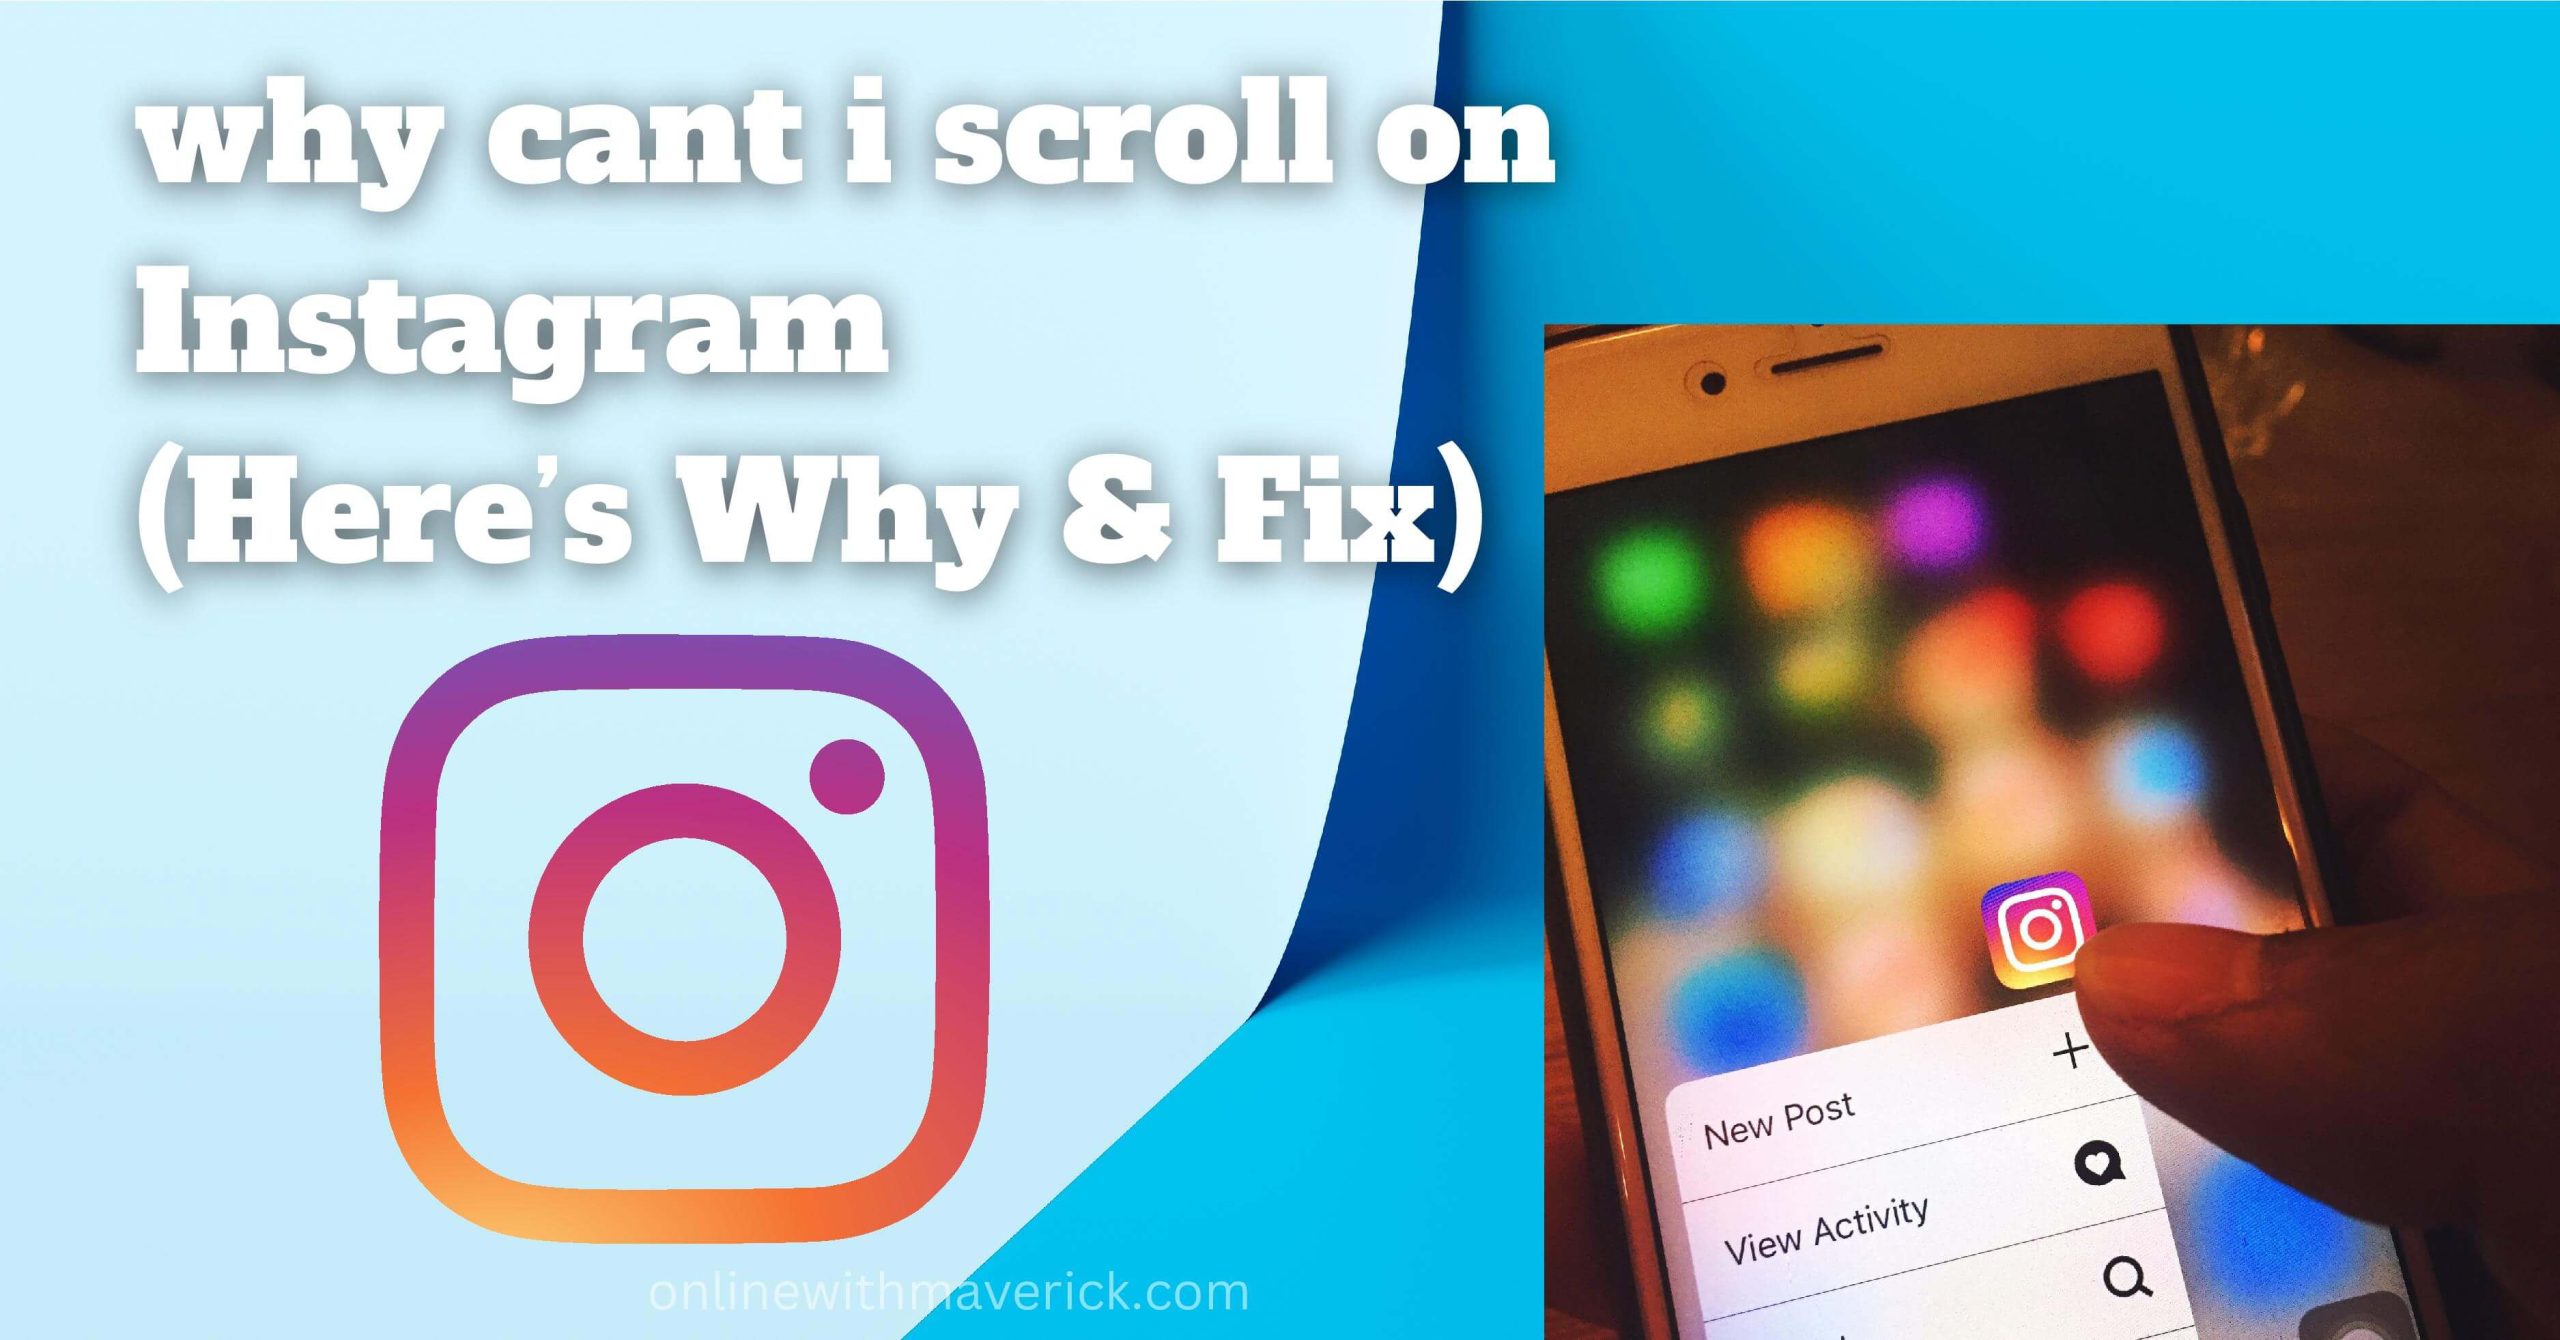 why cant i scroll on instagram?